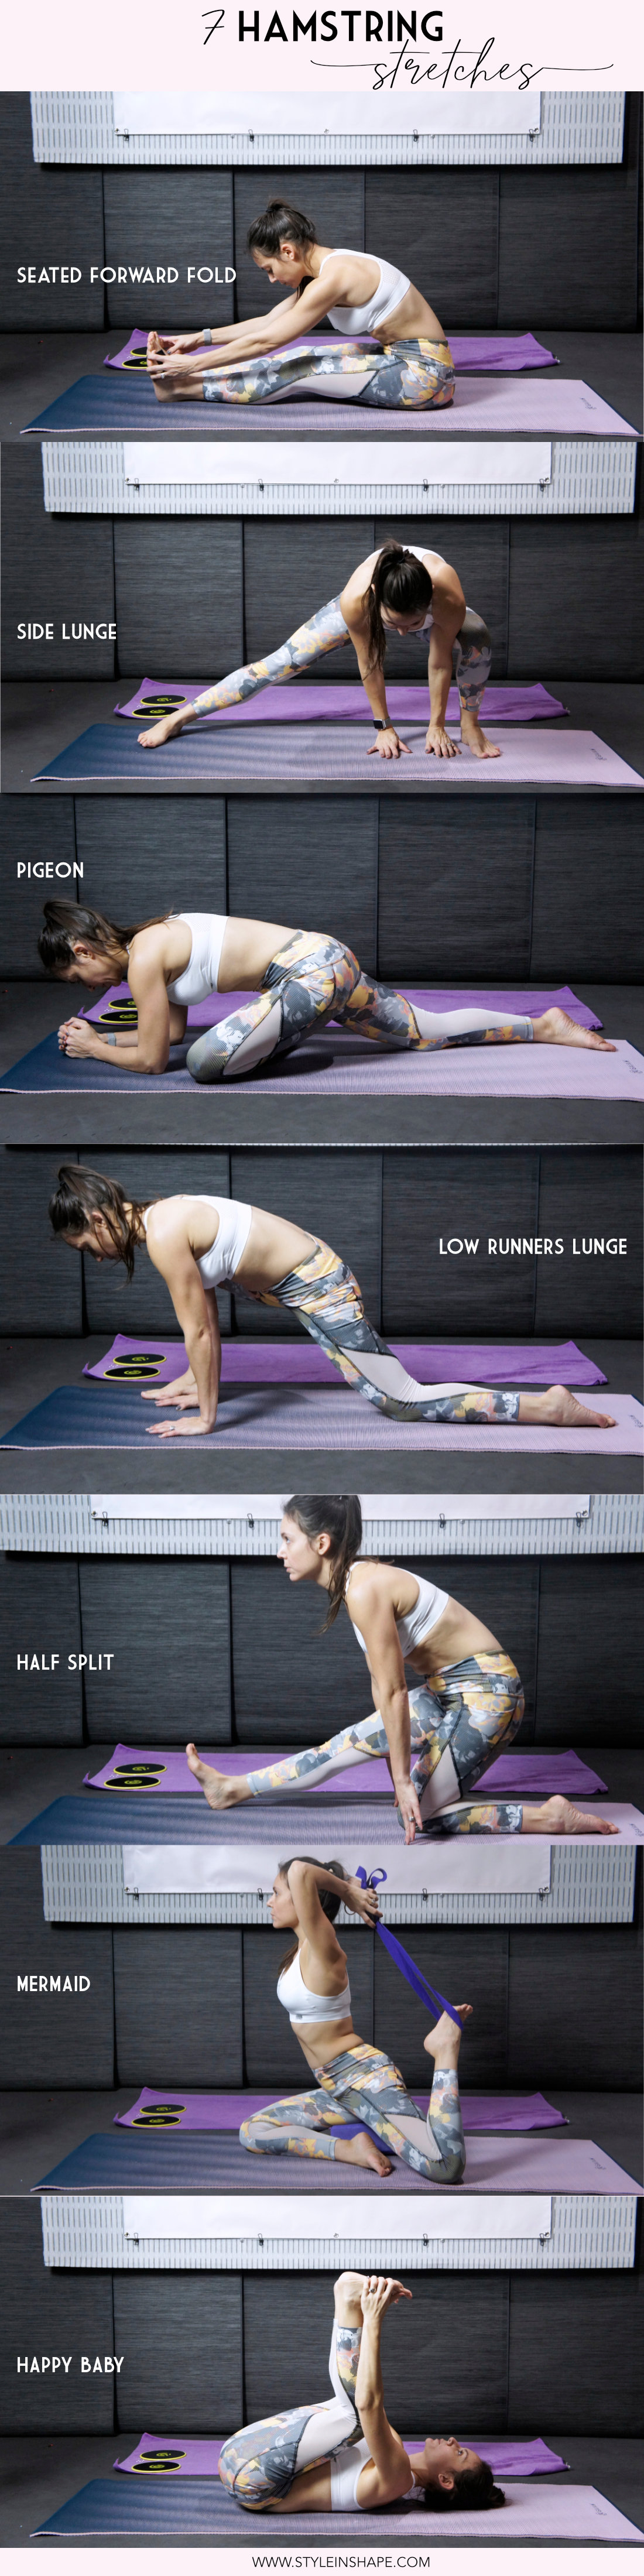 7 Hamstring Stretches | Style in Shape